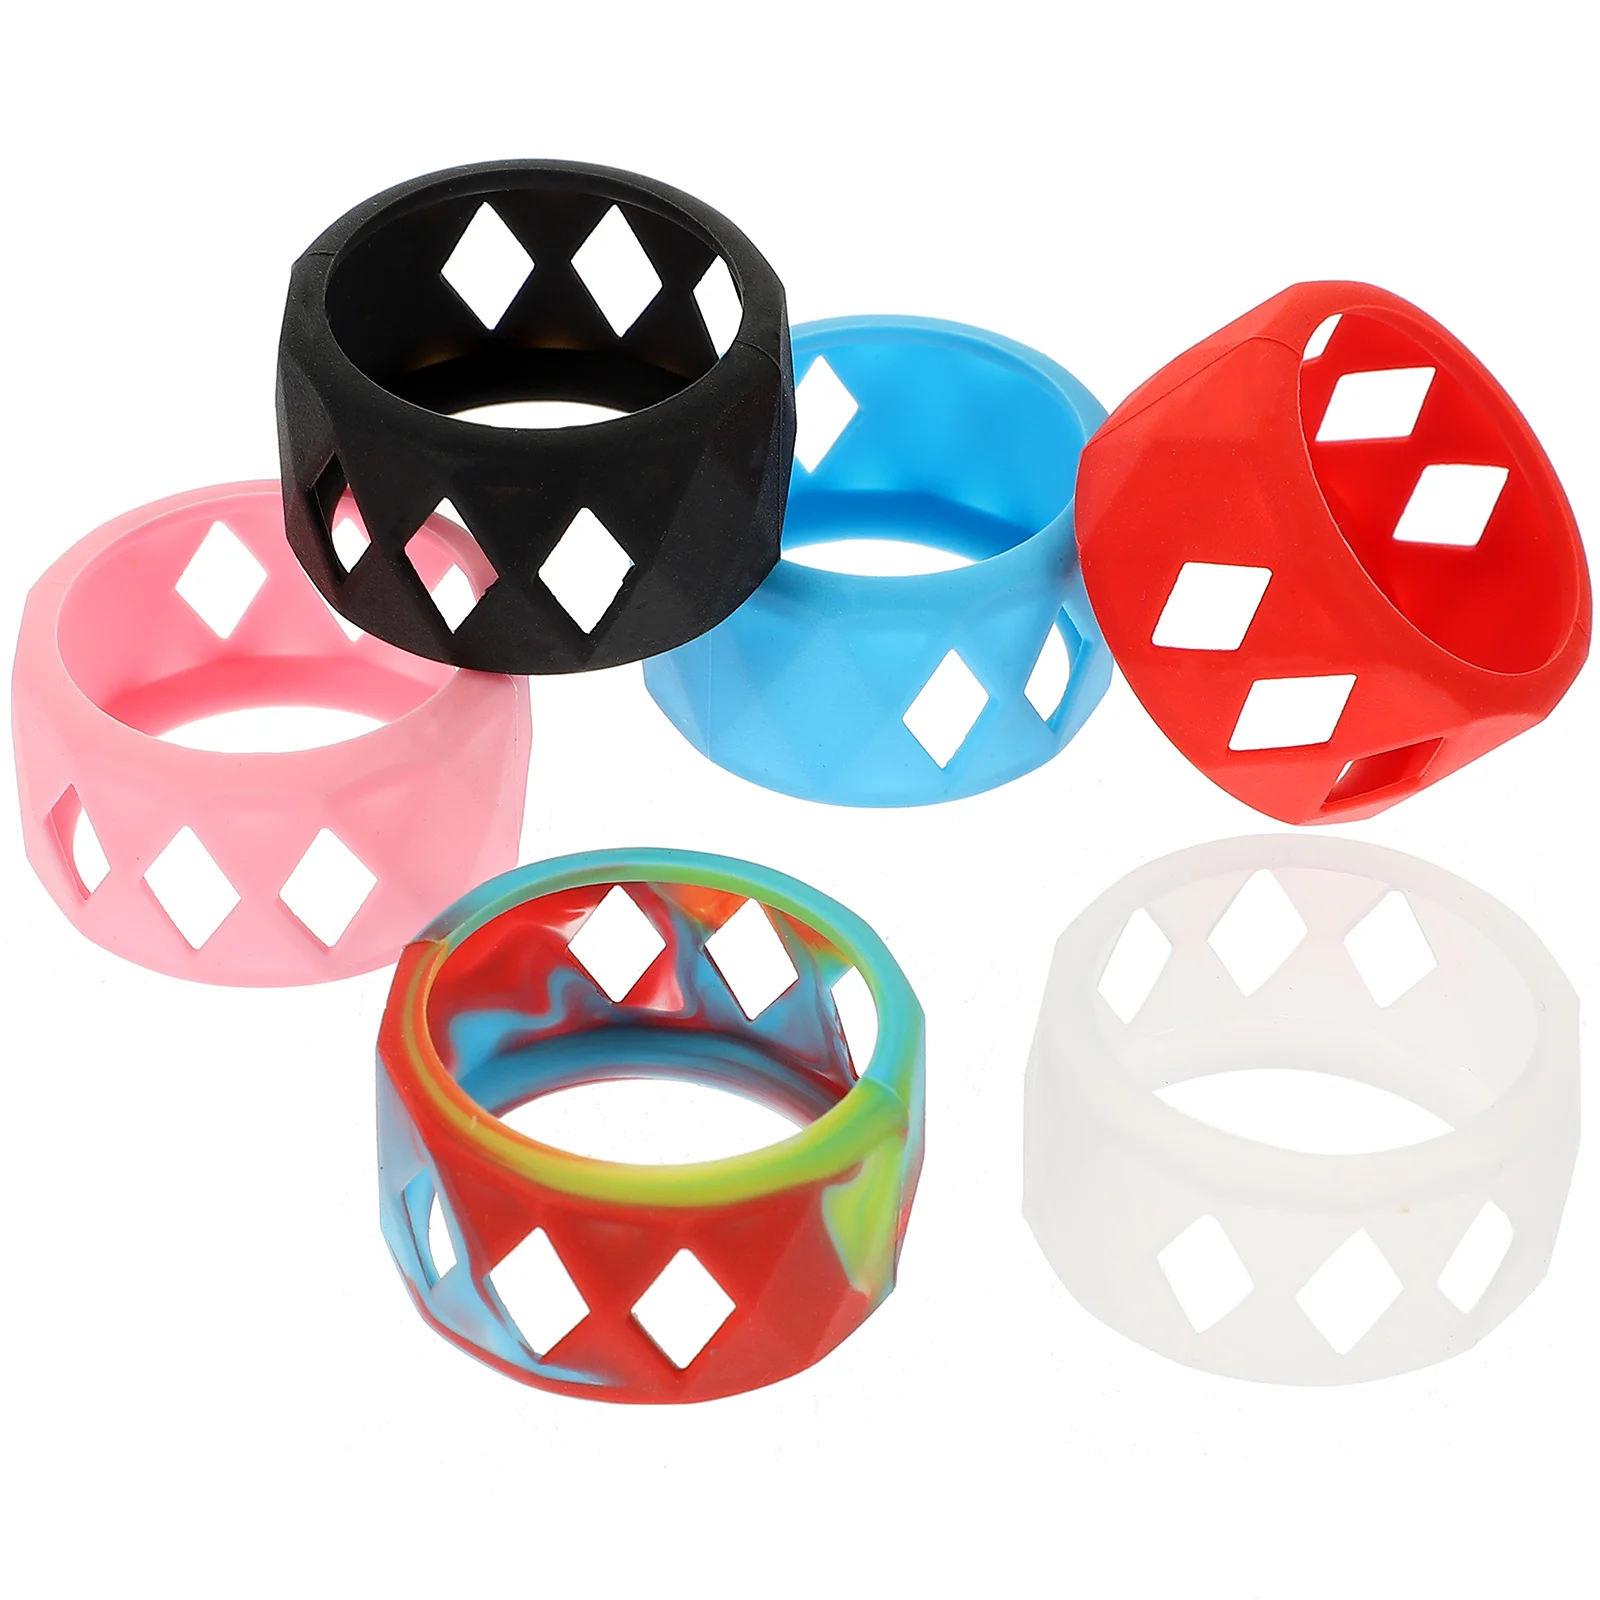 

Sleeve Ring Silicone Non Skidhollow Out Protection Soft Antisupple Band Sleeves